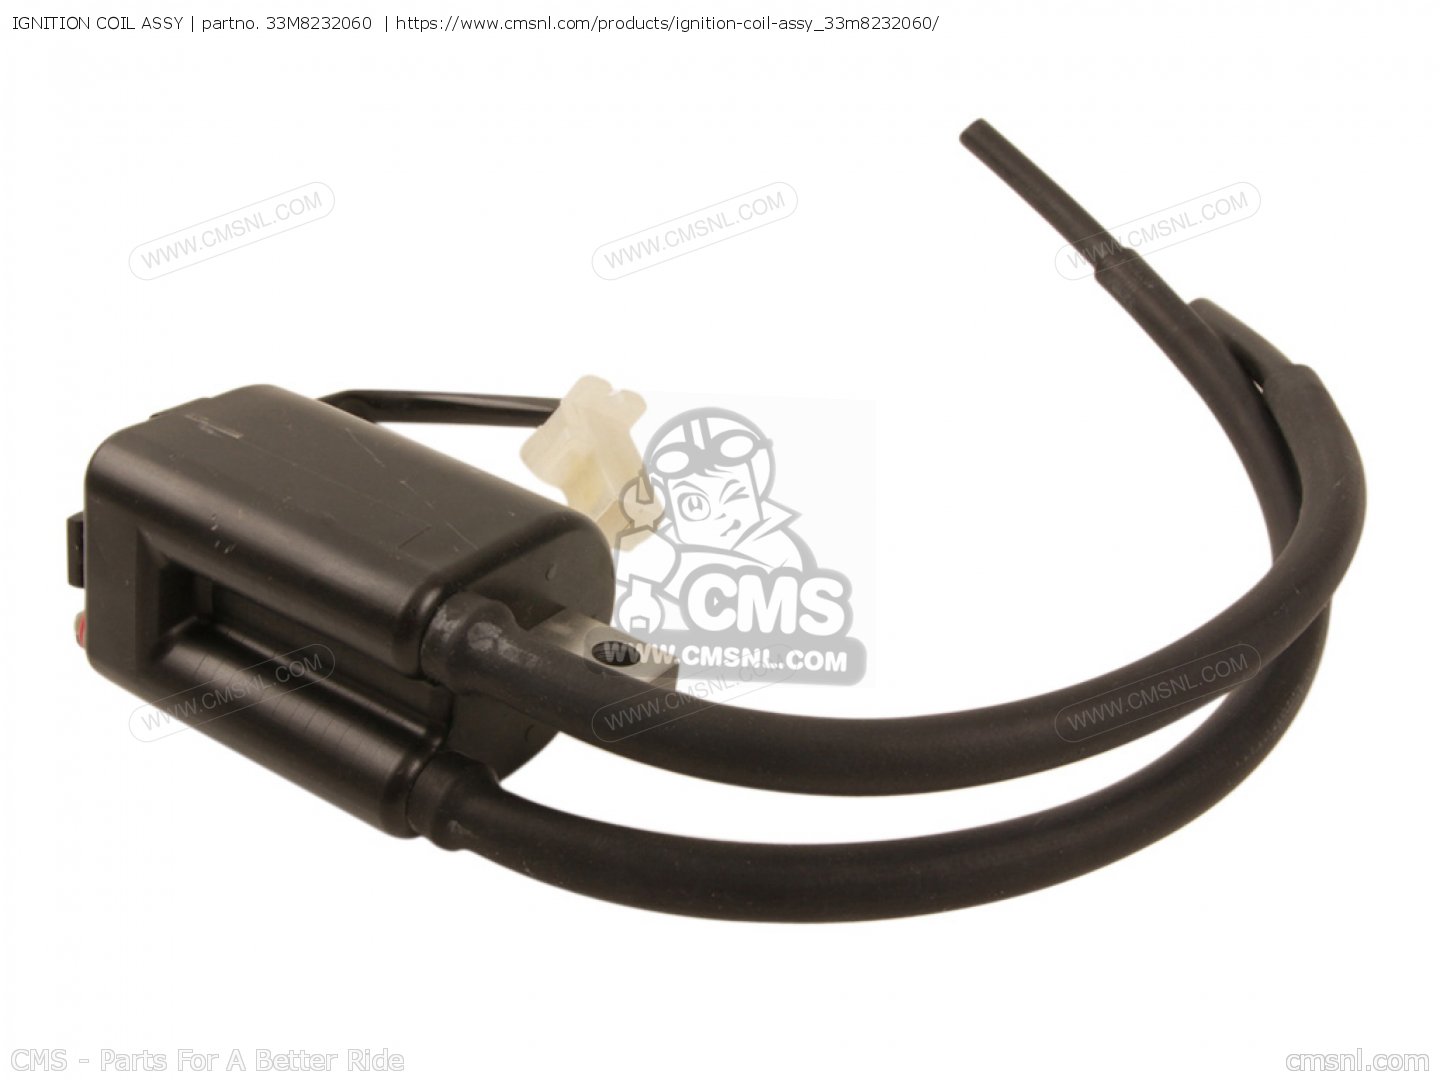 51J Ignition Coil for 1984 Yamaha XJ 600